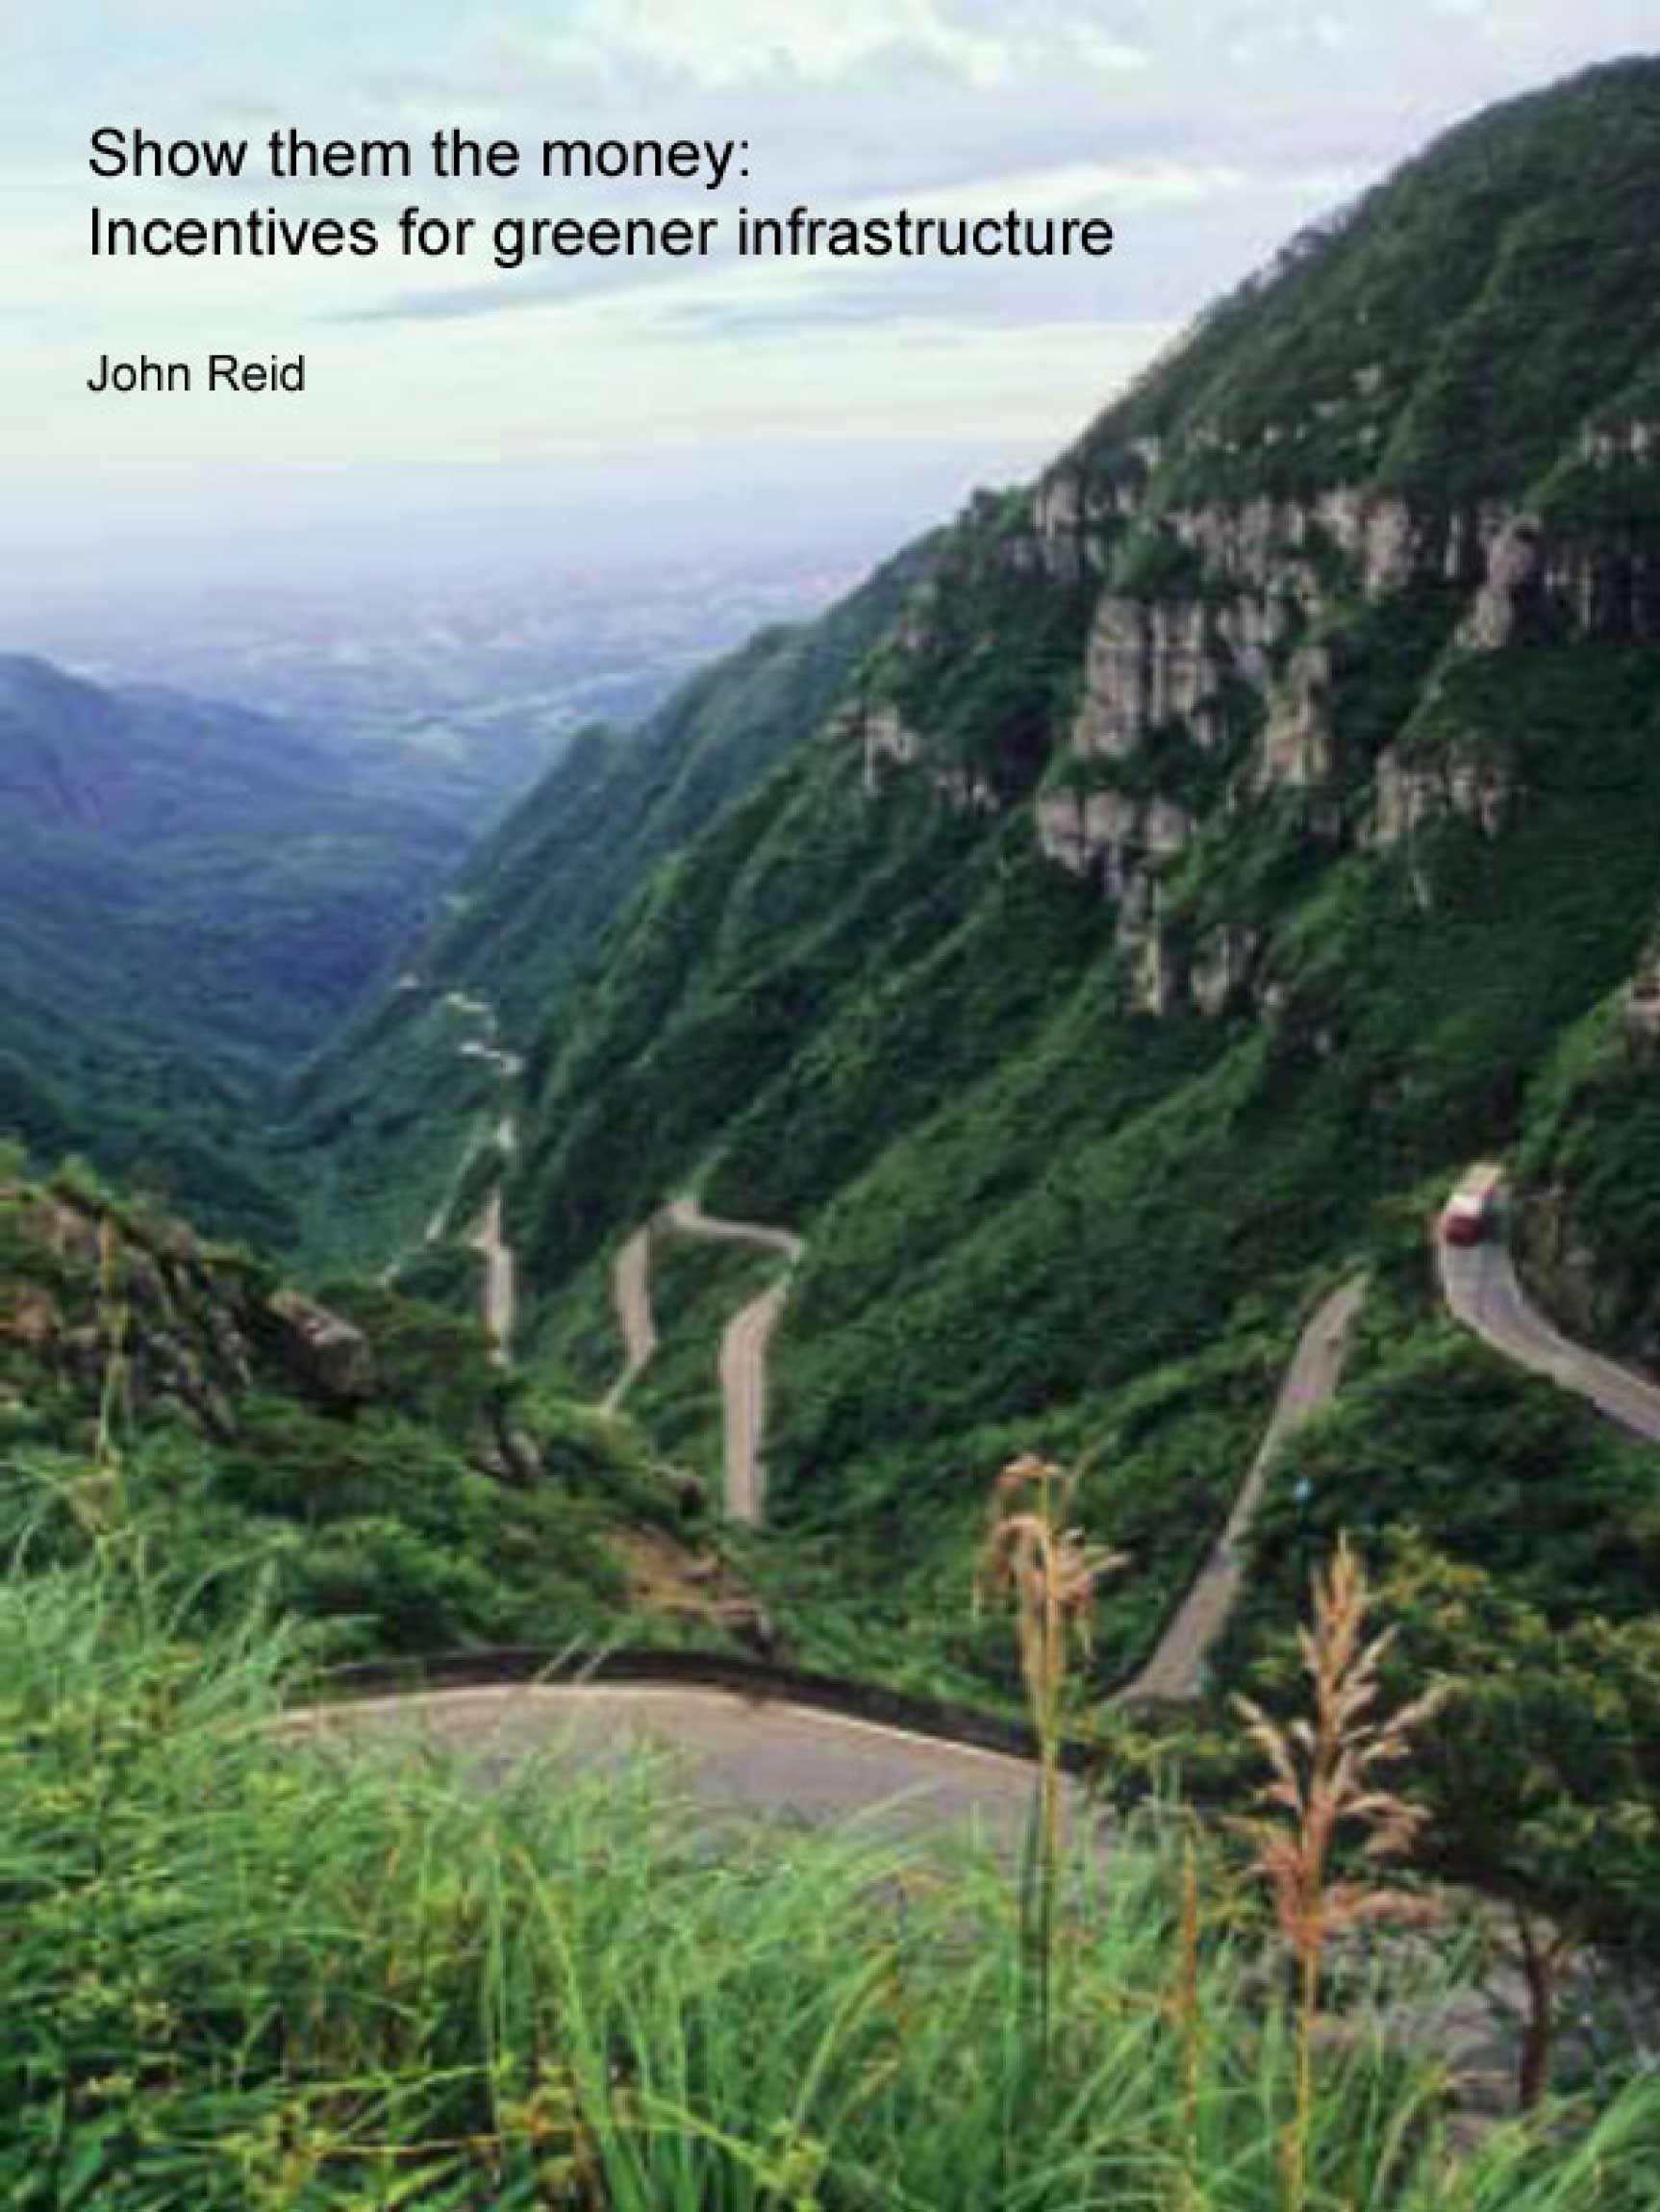 Front cover of report showing a road cutting across a steep mountainside.